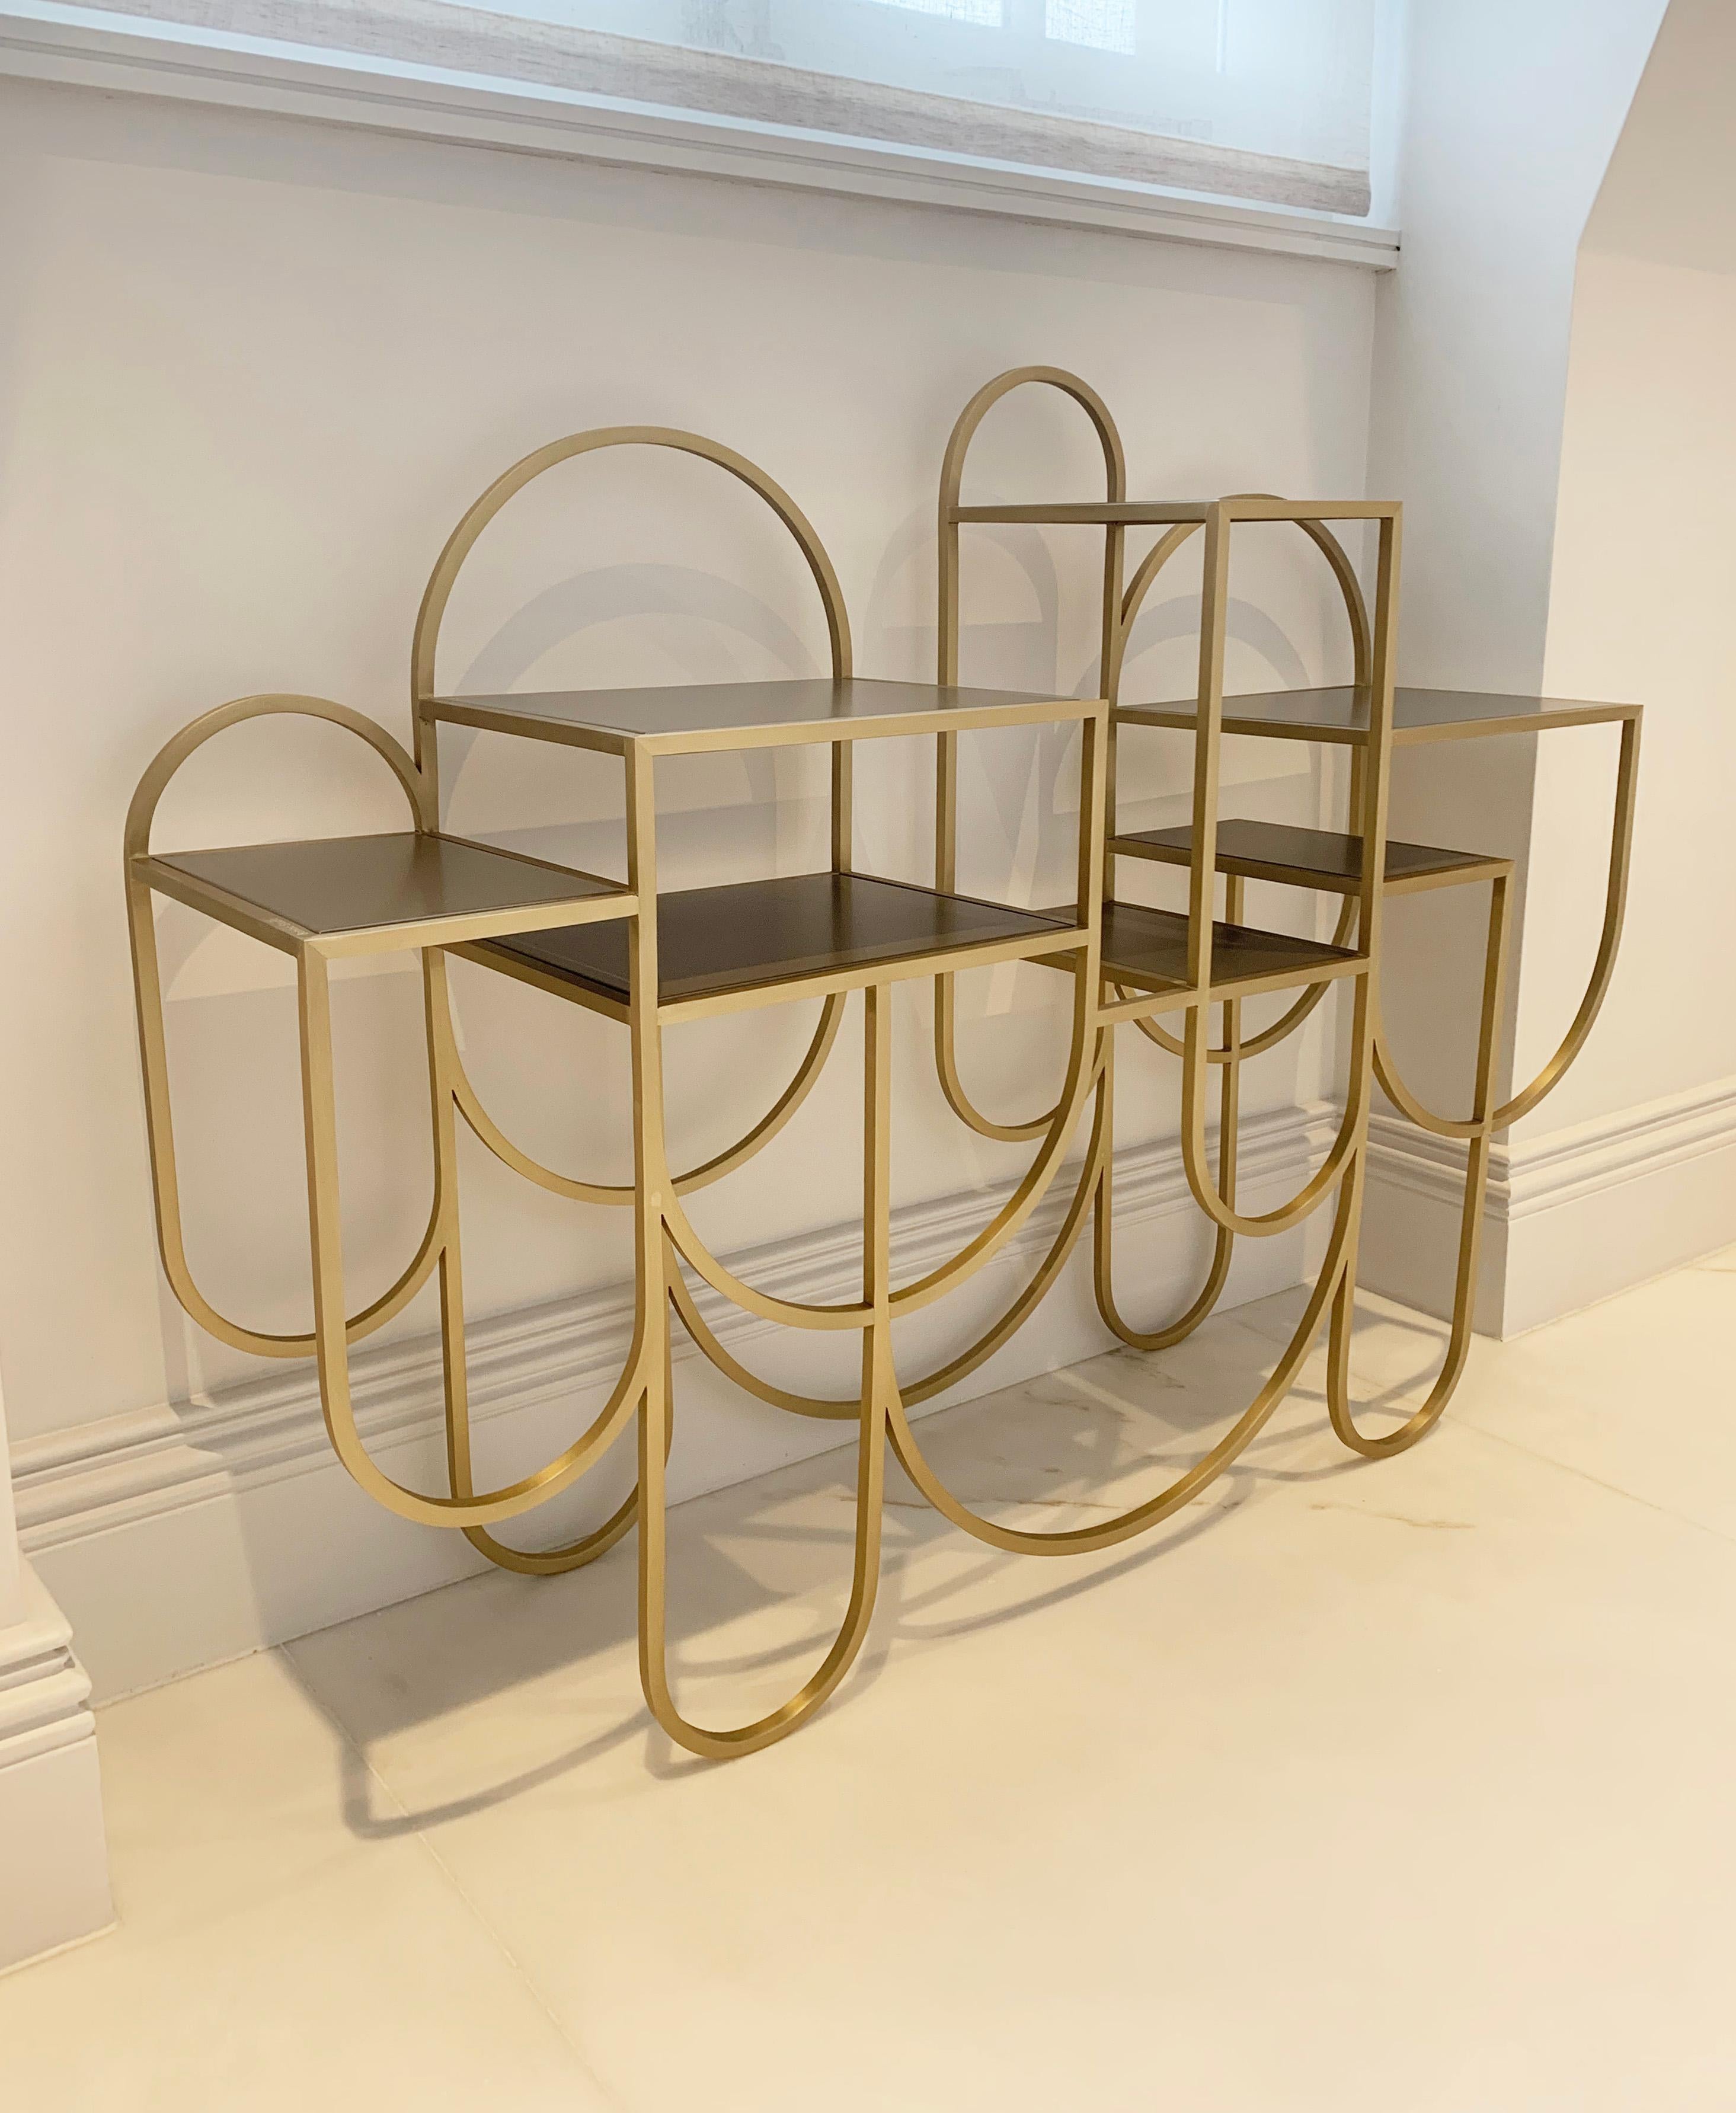 Bauhaus style gold metal console table with shelves.

This wonderful modernist style console table is by the iconic jewellery designer, turned design paragon: Lara Bohinc. This console table is like sculptural piece of jewellery ready to adorn your